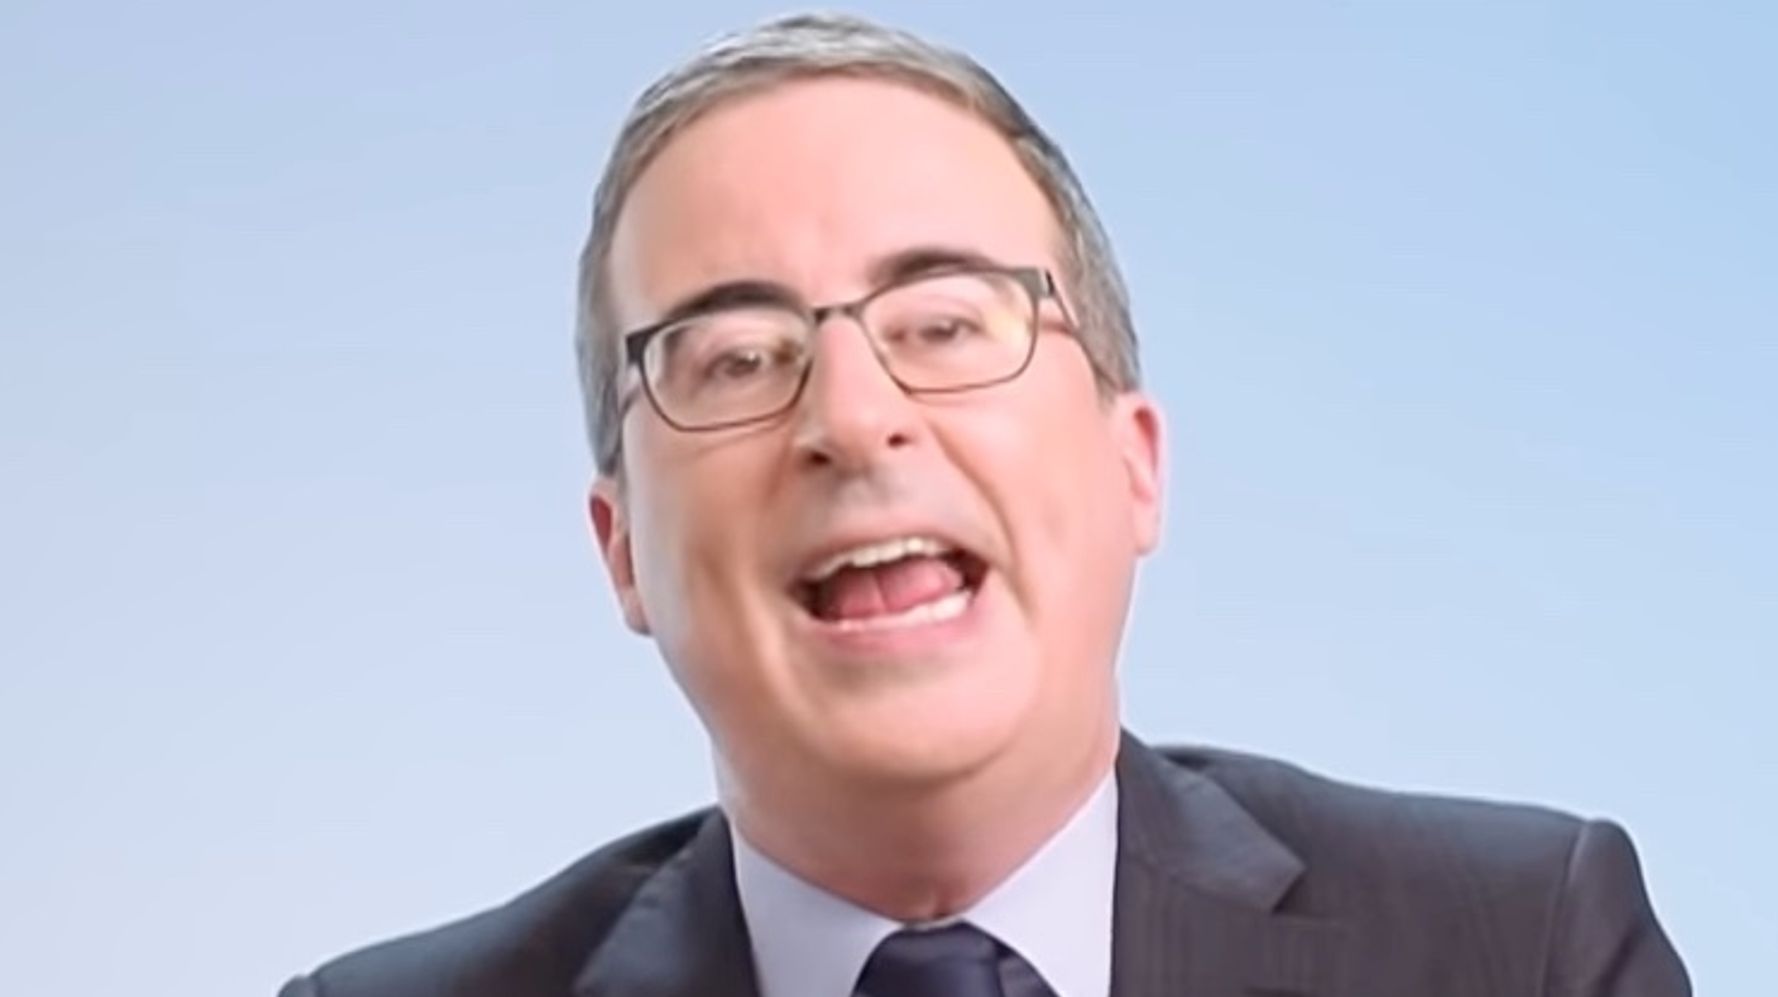 John Oliver Exposes The Racist Gun Laws That Help People Get Away With Killing